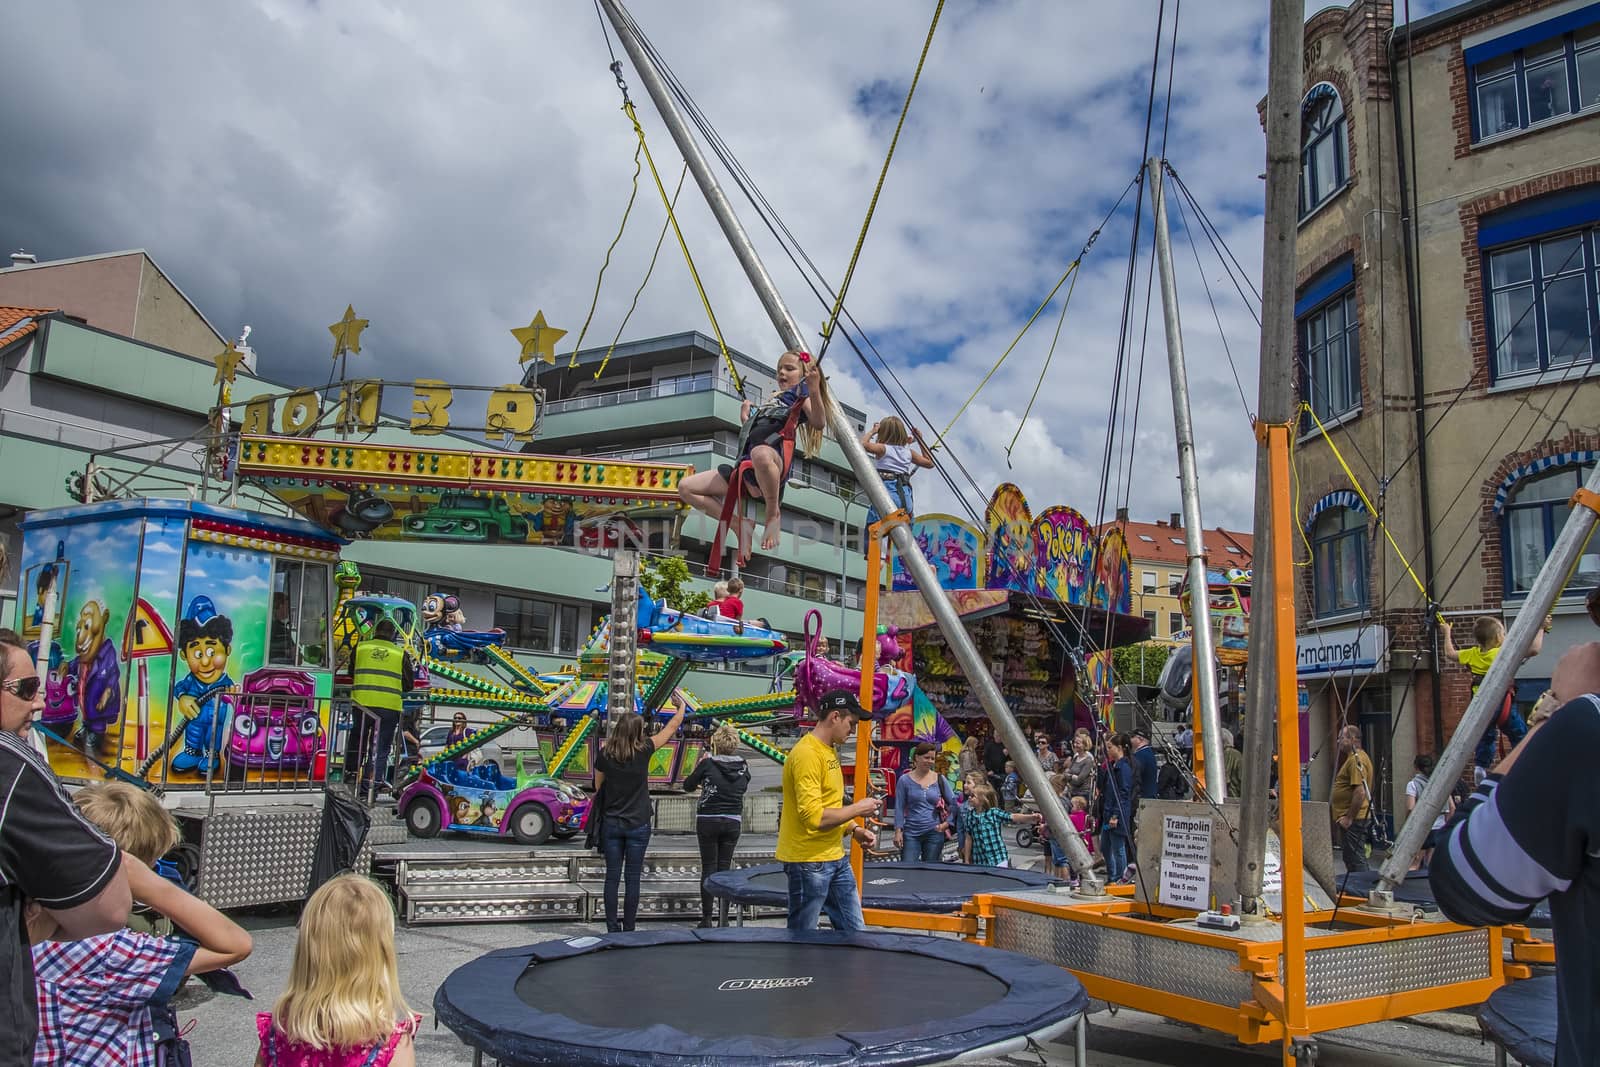 Kids have fun at the funfair on the square in Halden, Norway.